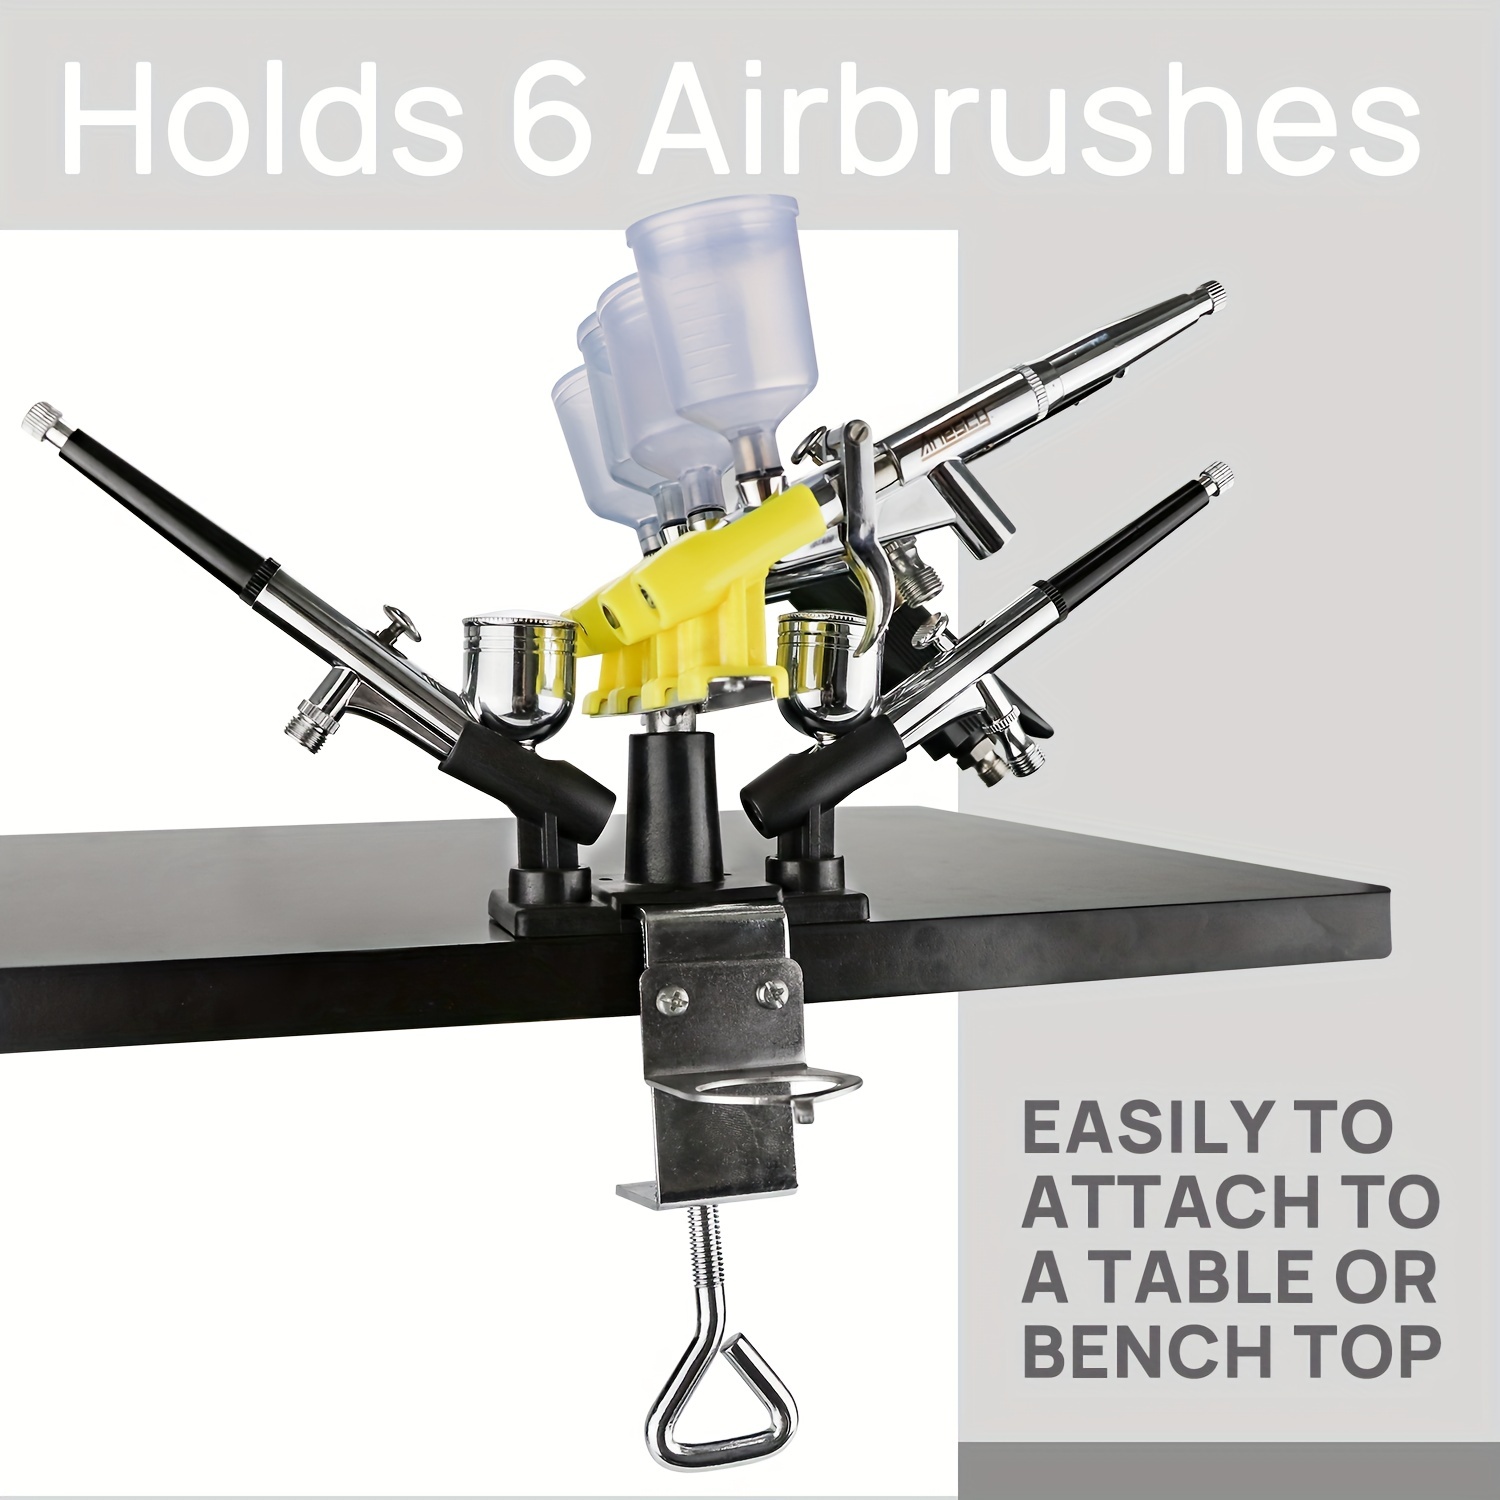 Universal Clamp-On Airbrush Holder that Holds Up to 6 Airbrushes, 6 Airbrush  Holder - Kroger